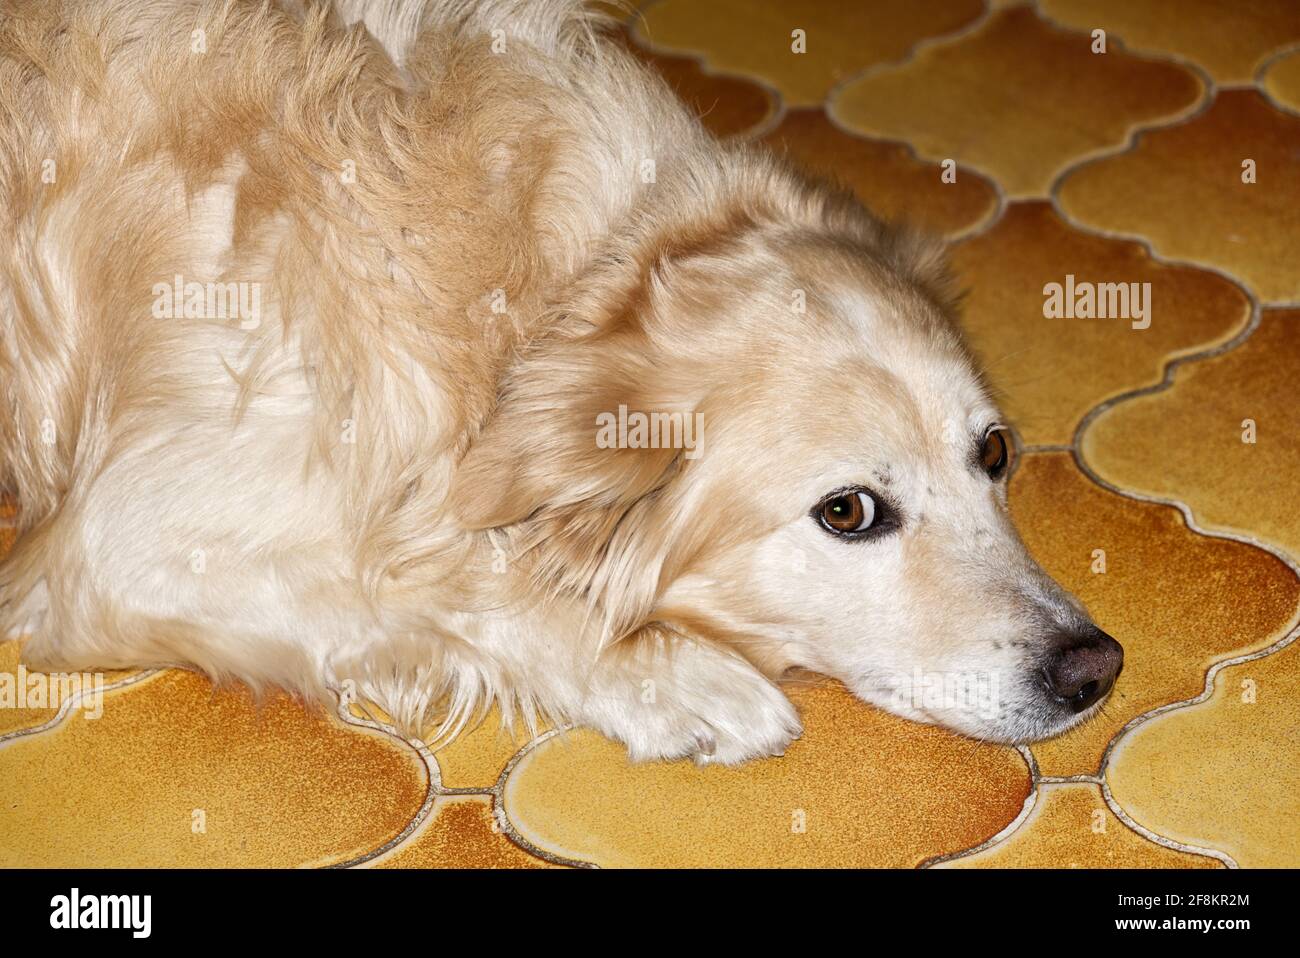 a cuddly golden retriever breed dog looks straight into the camera Stock Photo